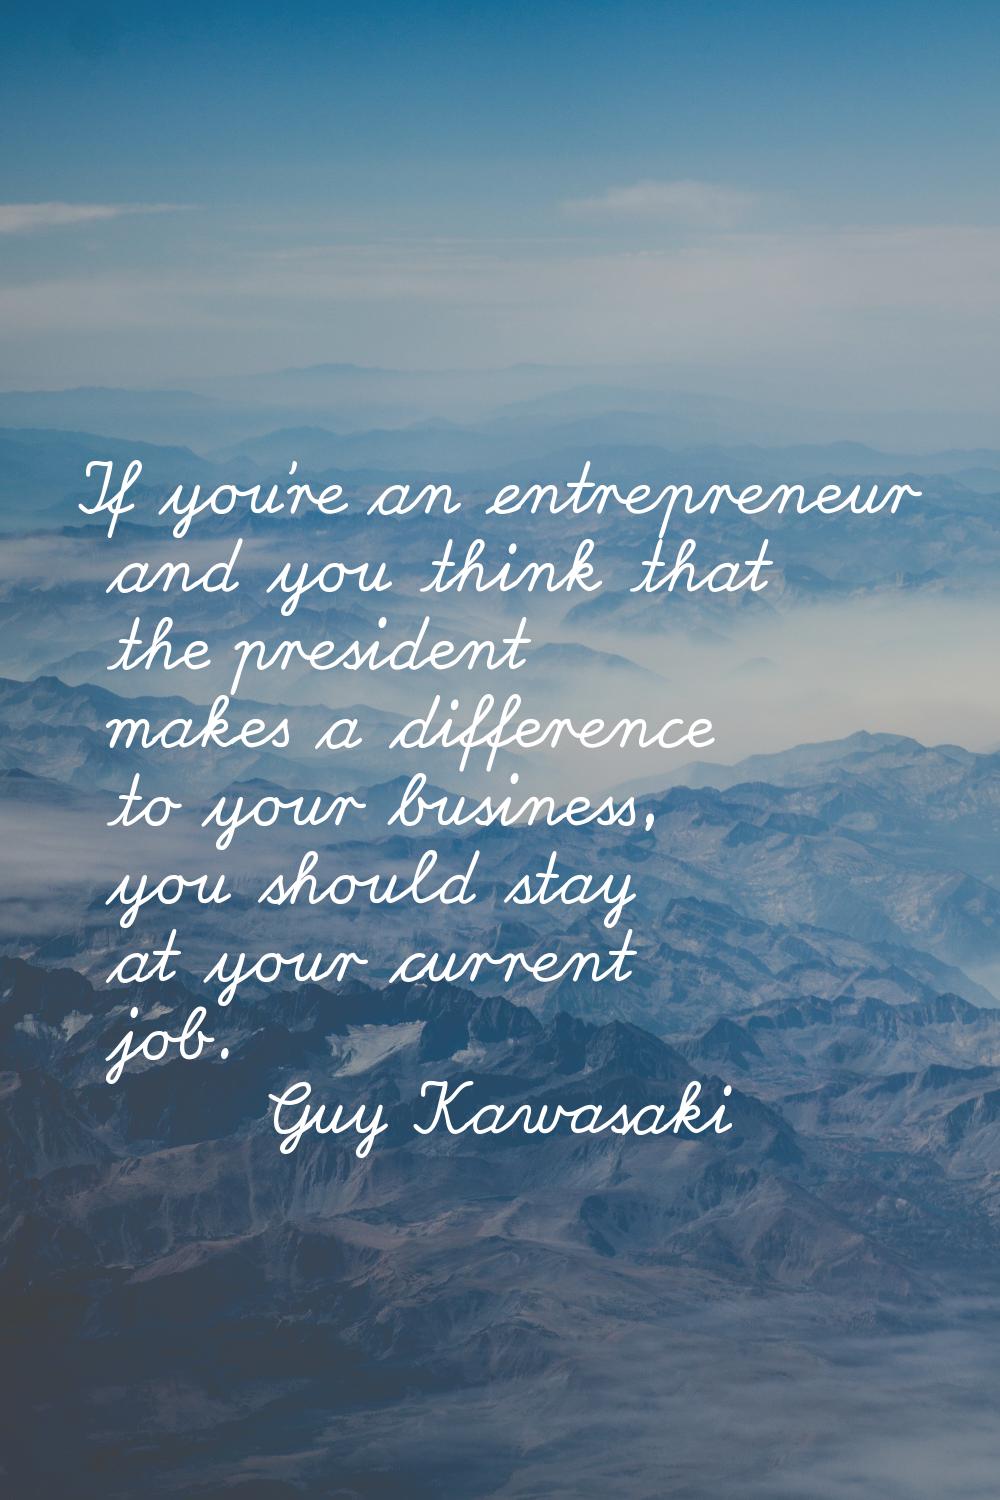 If you're an entrepreneur and you think that the president makes a difference to your business, you